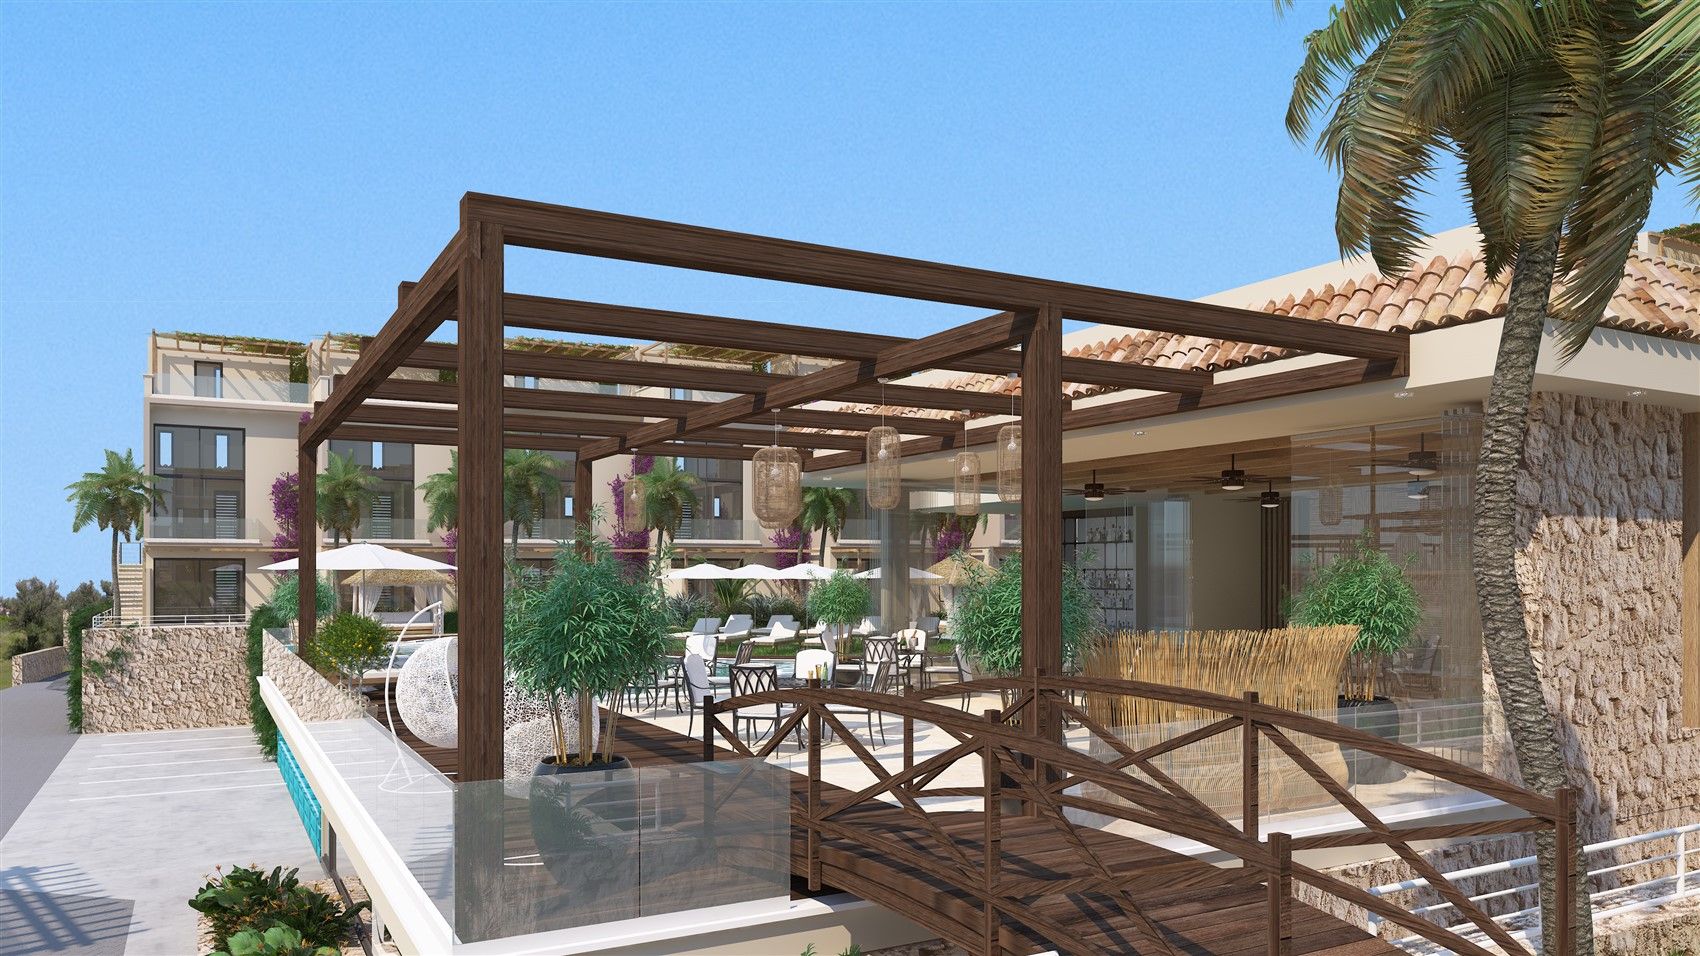 3 bedroom bungalows in new complex - Northern Cyprus